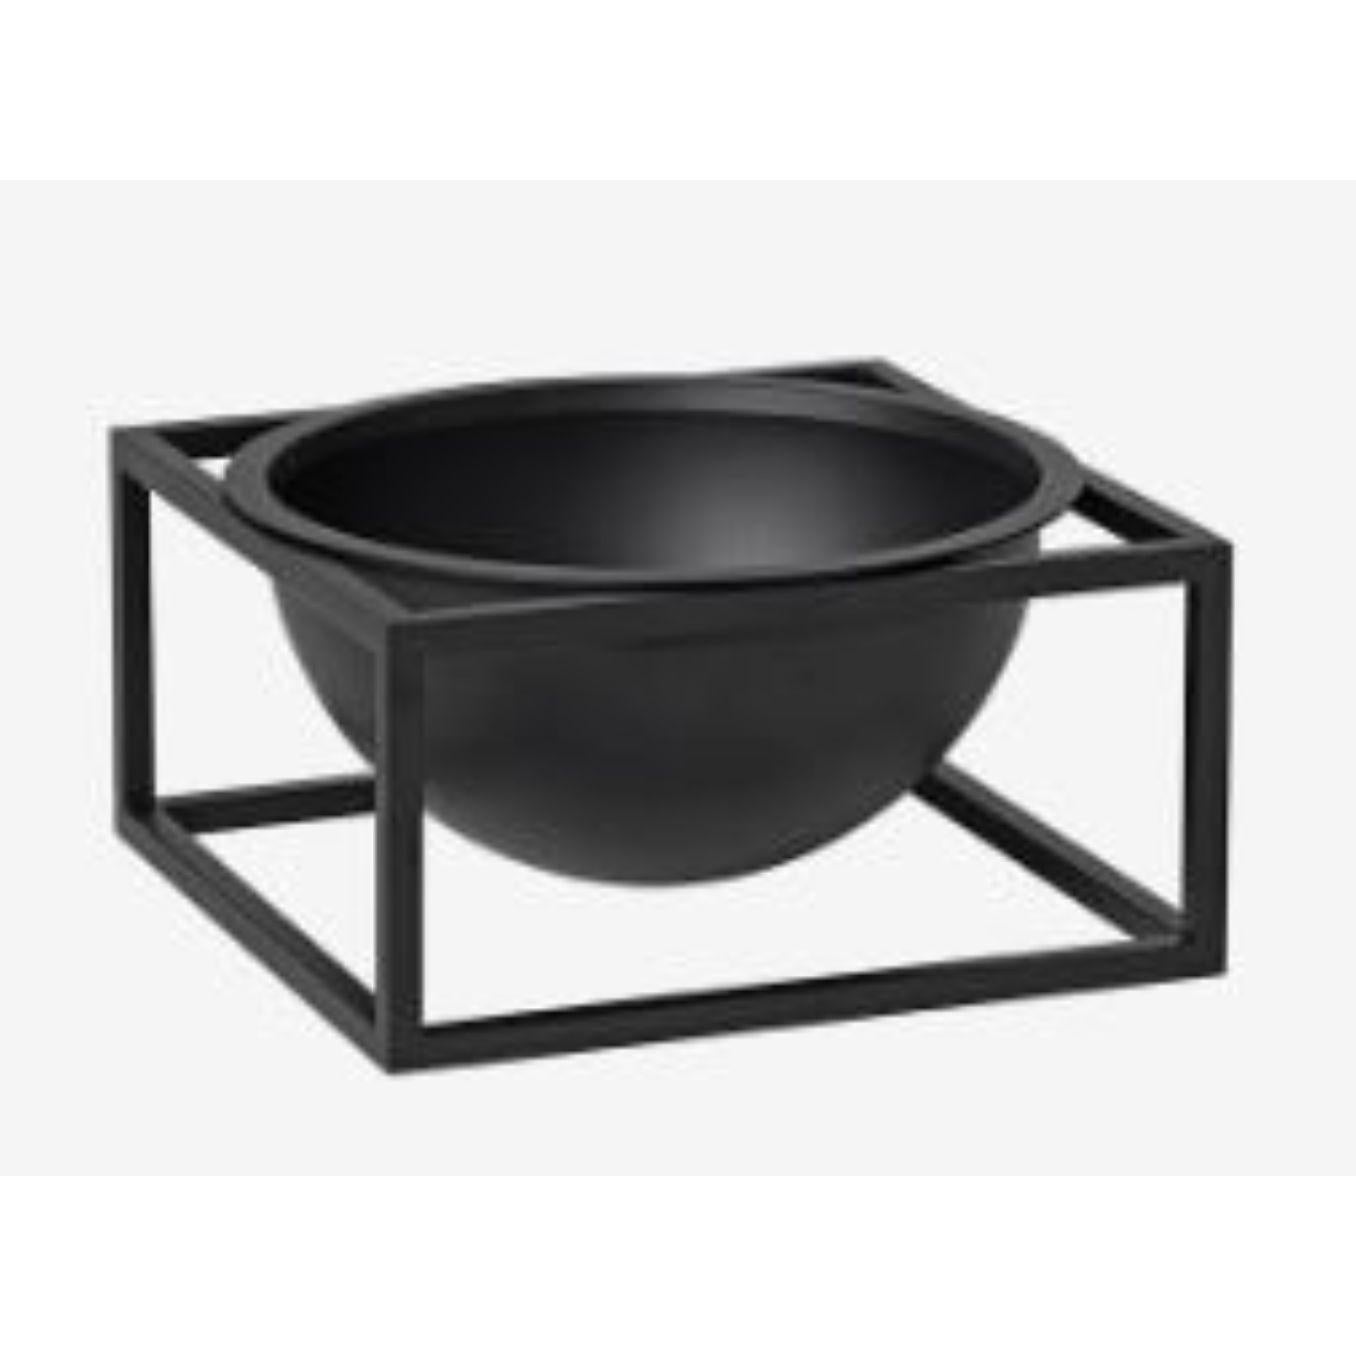 Black small centerpiece Kubus bowl by Lassen
Dimensions: d 14 x w 14 x h 7 cm 
Materials: Metal 
Weight: 1.35 Kg

The dictionary definition is “an object occupying a central, especially an adornment in the center of a table” and the Kubus